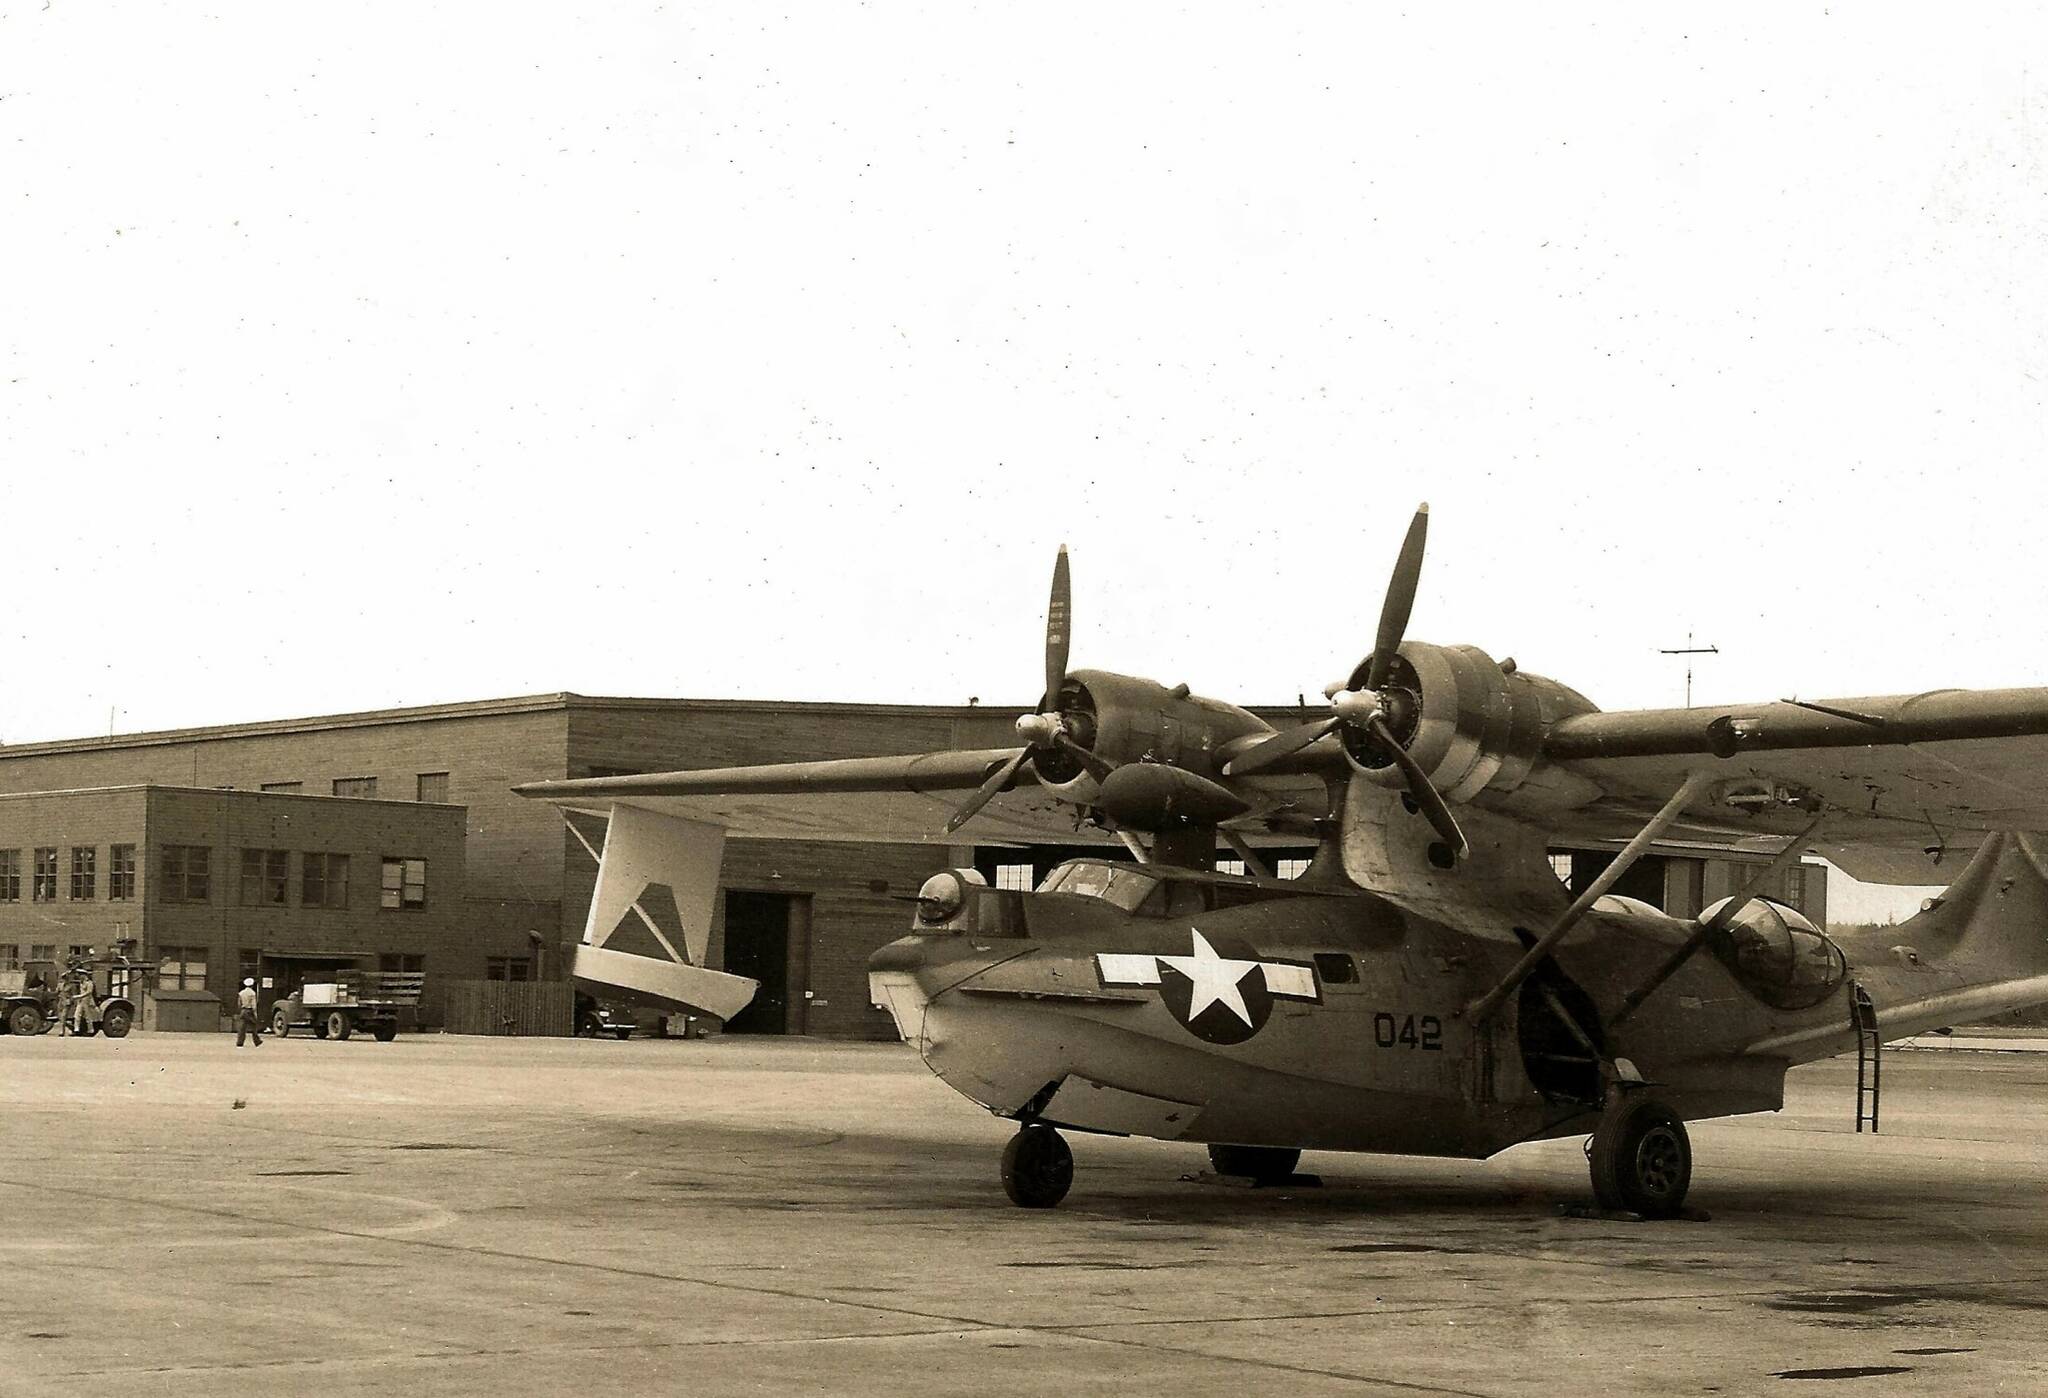 The PBY Catalina was one of the first planes flown out of Naval Air Station Whidbey Island. (Photo provided)